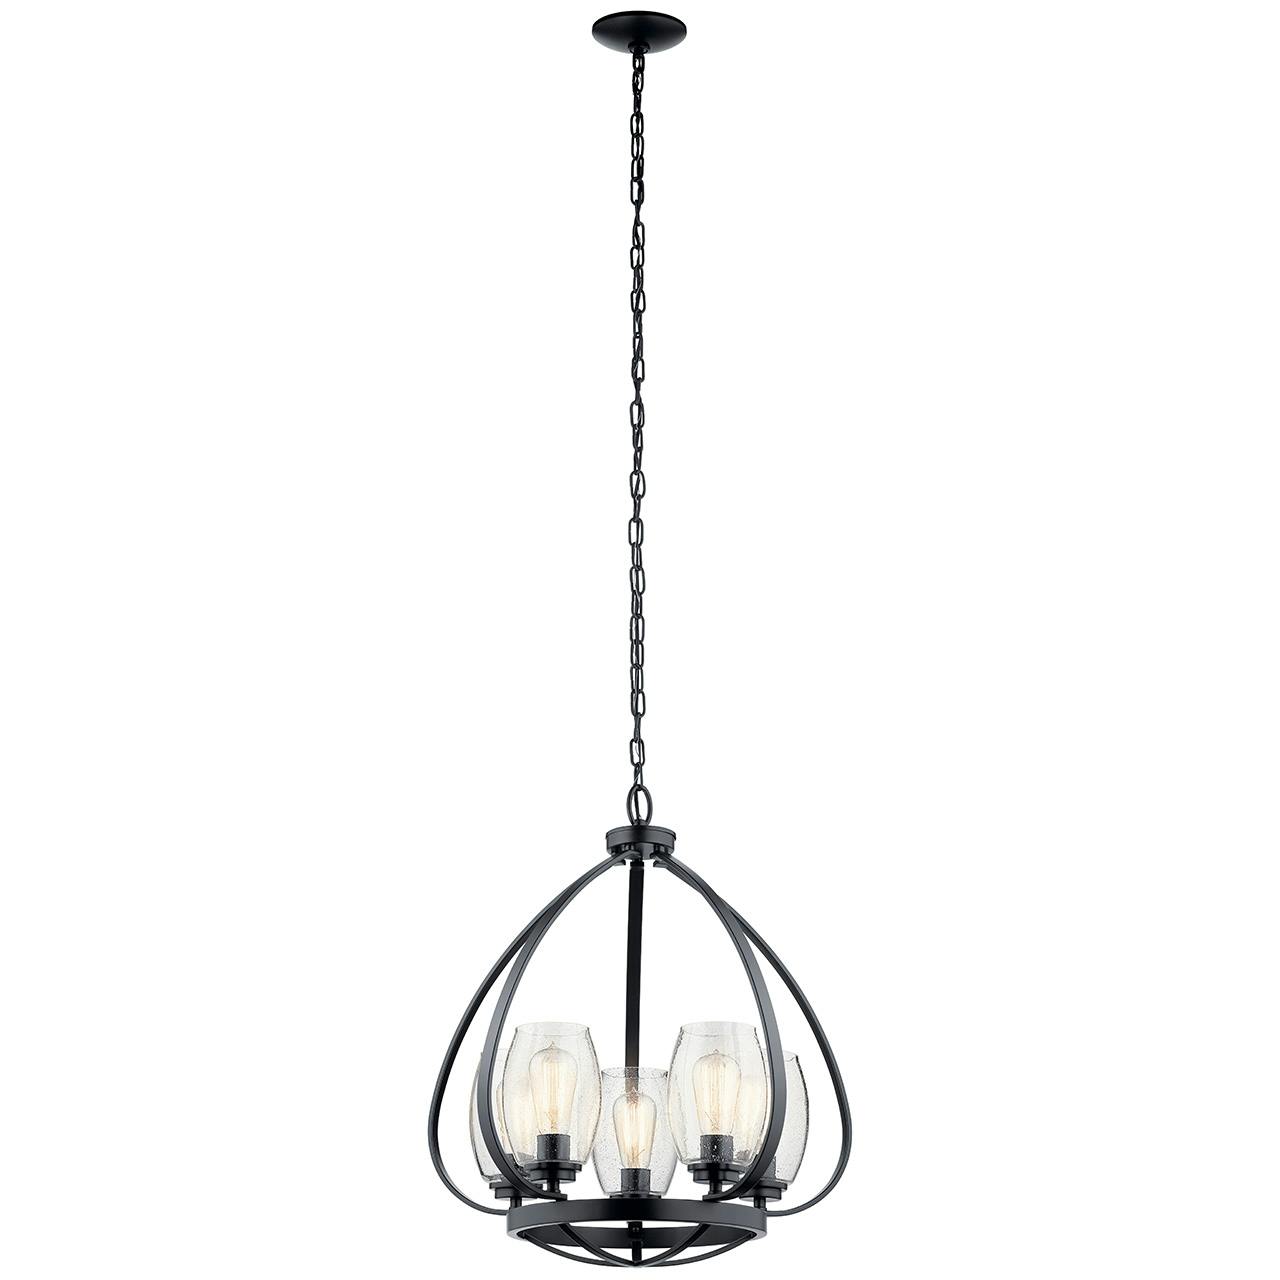 Tuscany 24" 5 Light Chandelier in Black on a white background